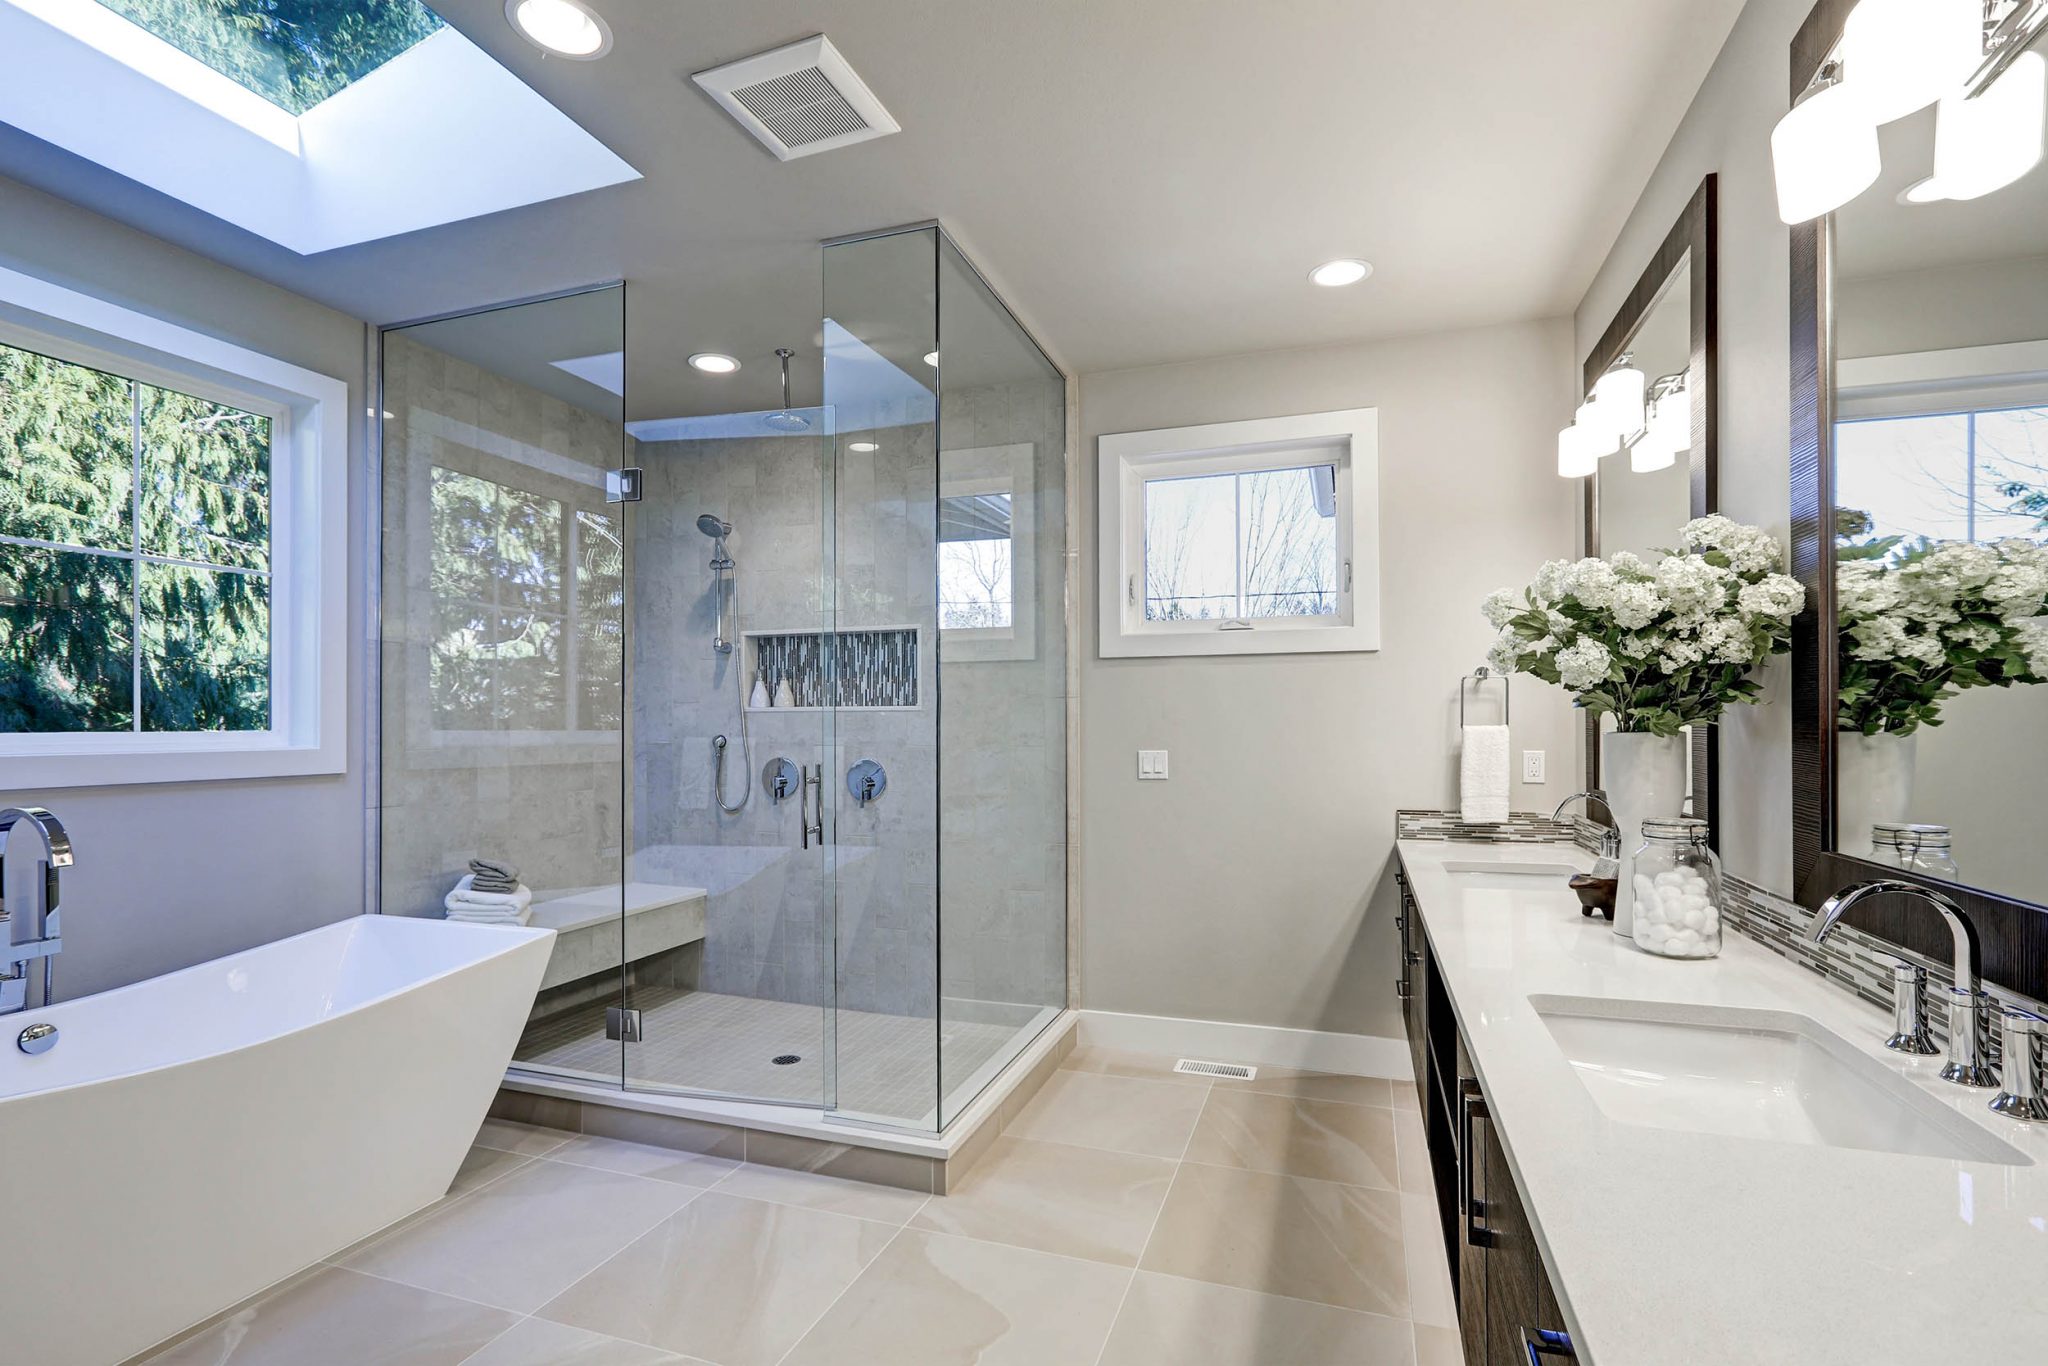 Kitchen and bathroom remodeling services in Orange County California.